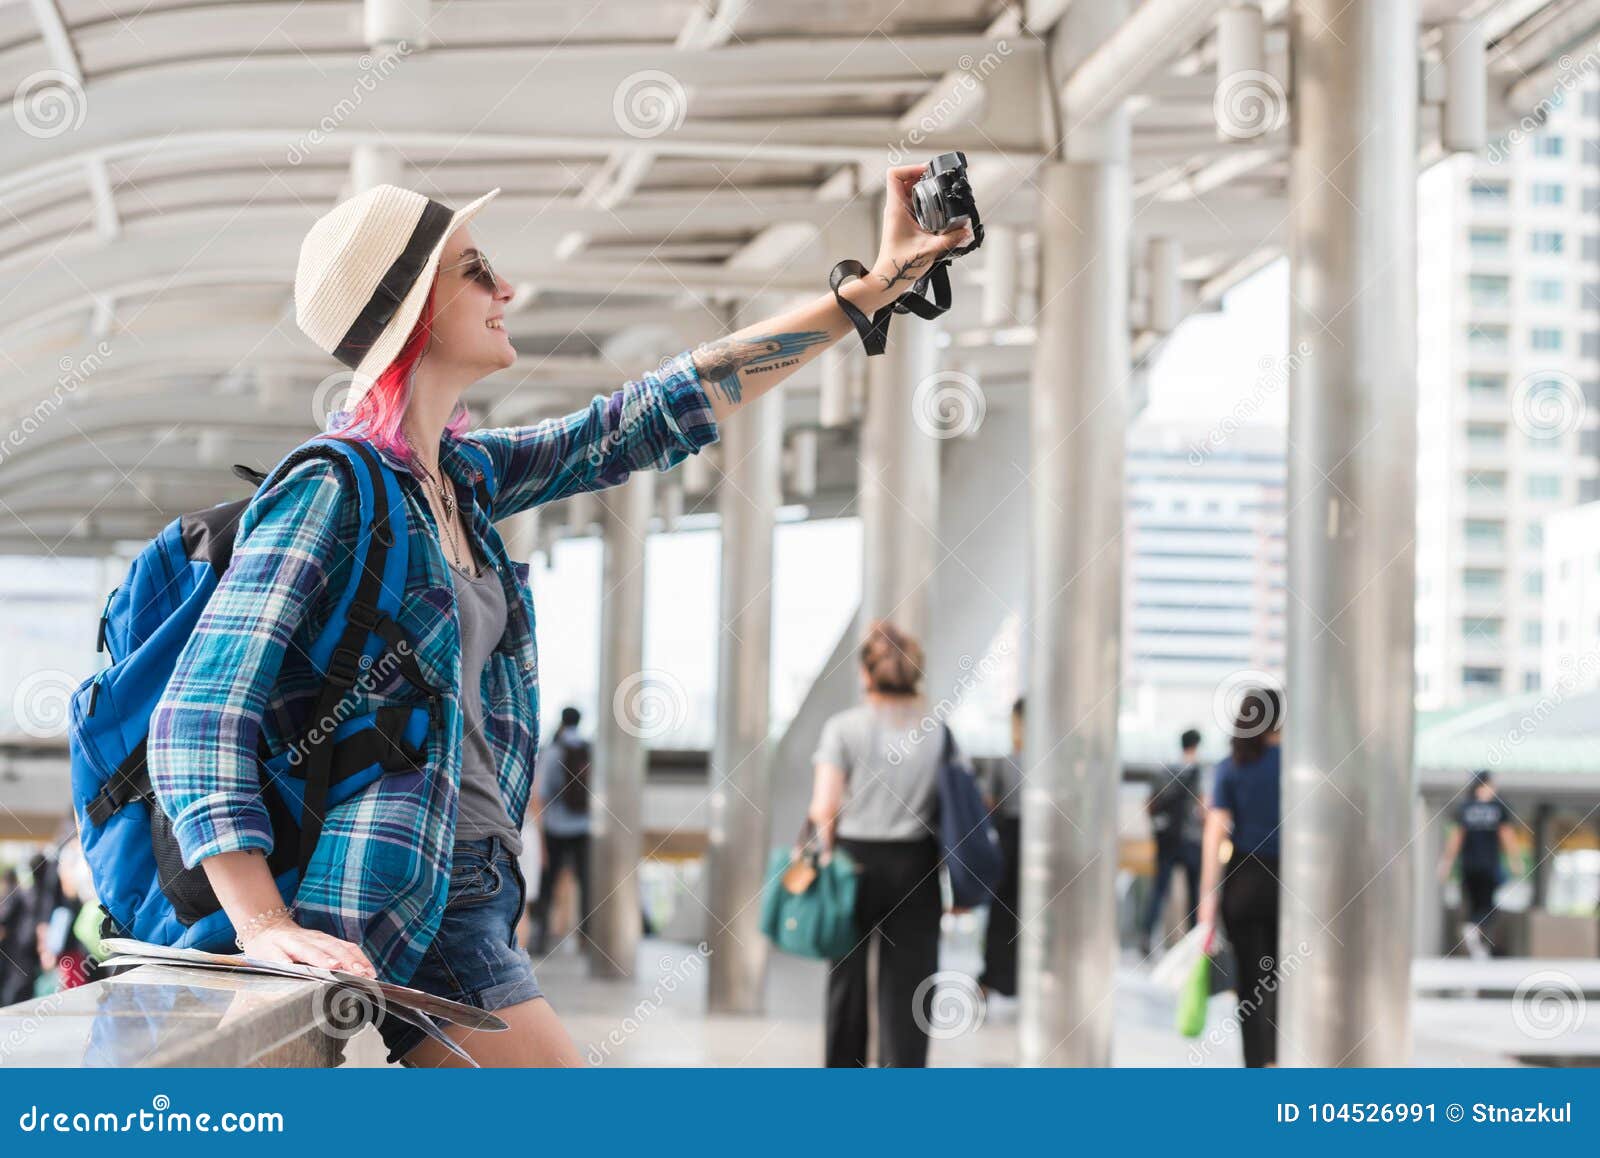 woman westerner taking selfie during travel in city happy moment